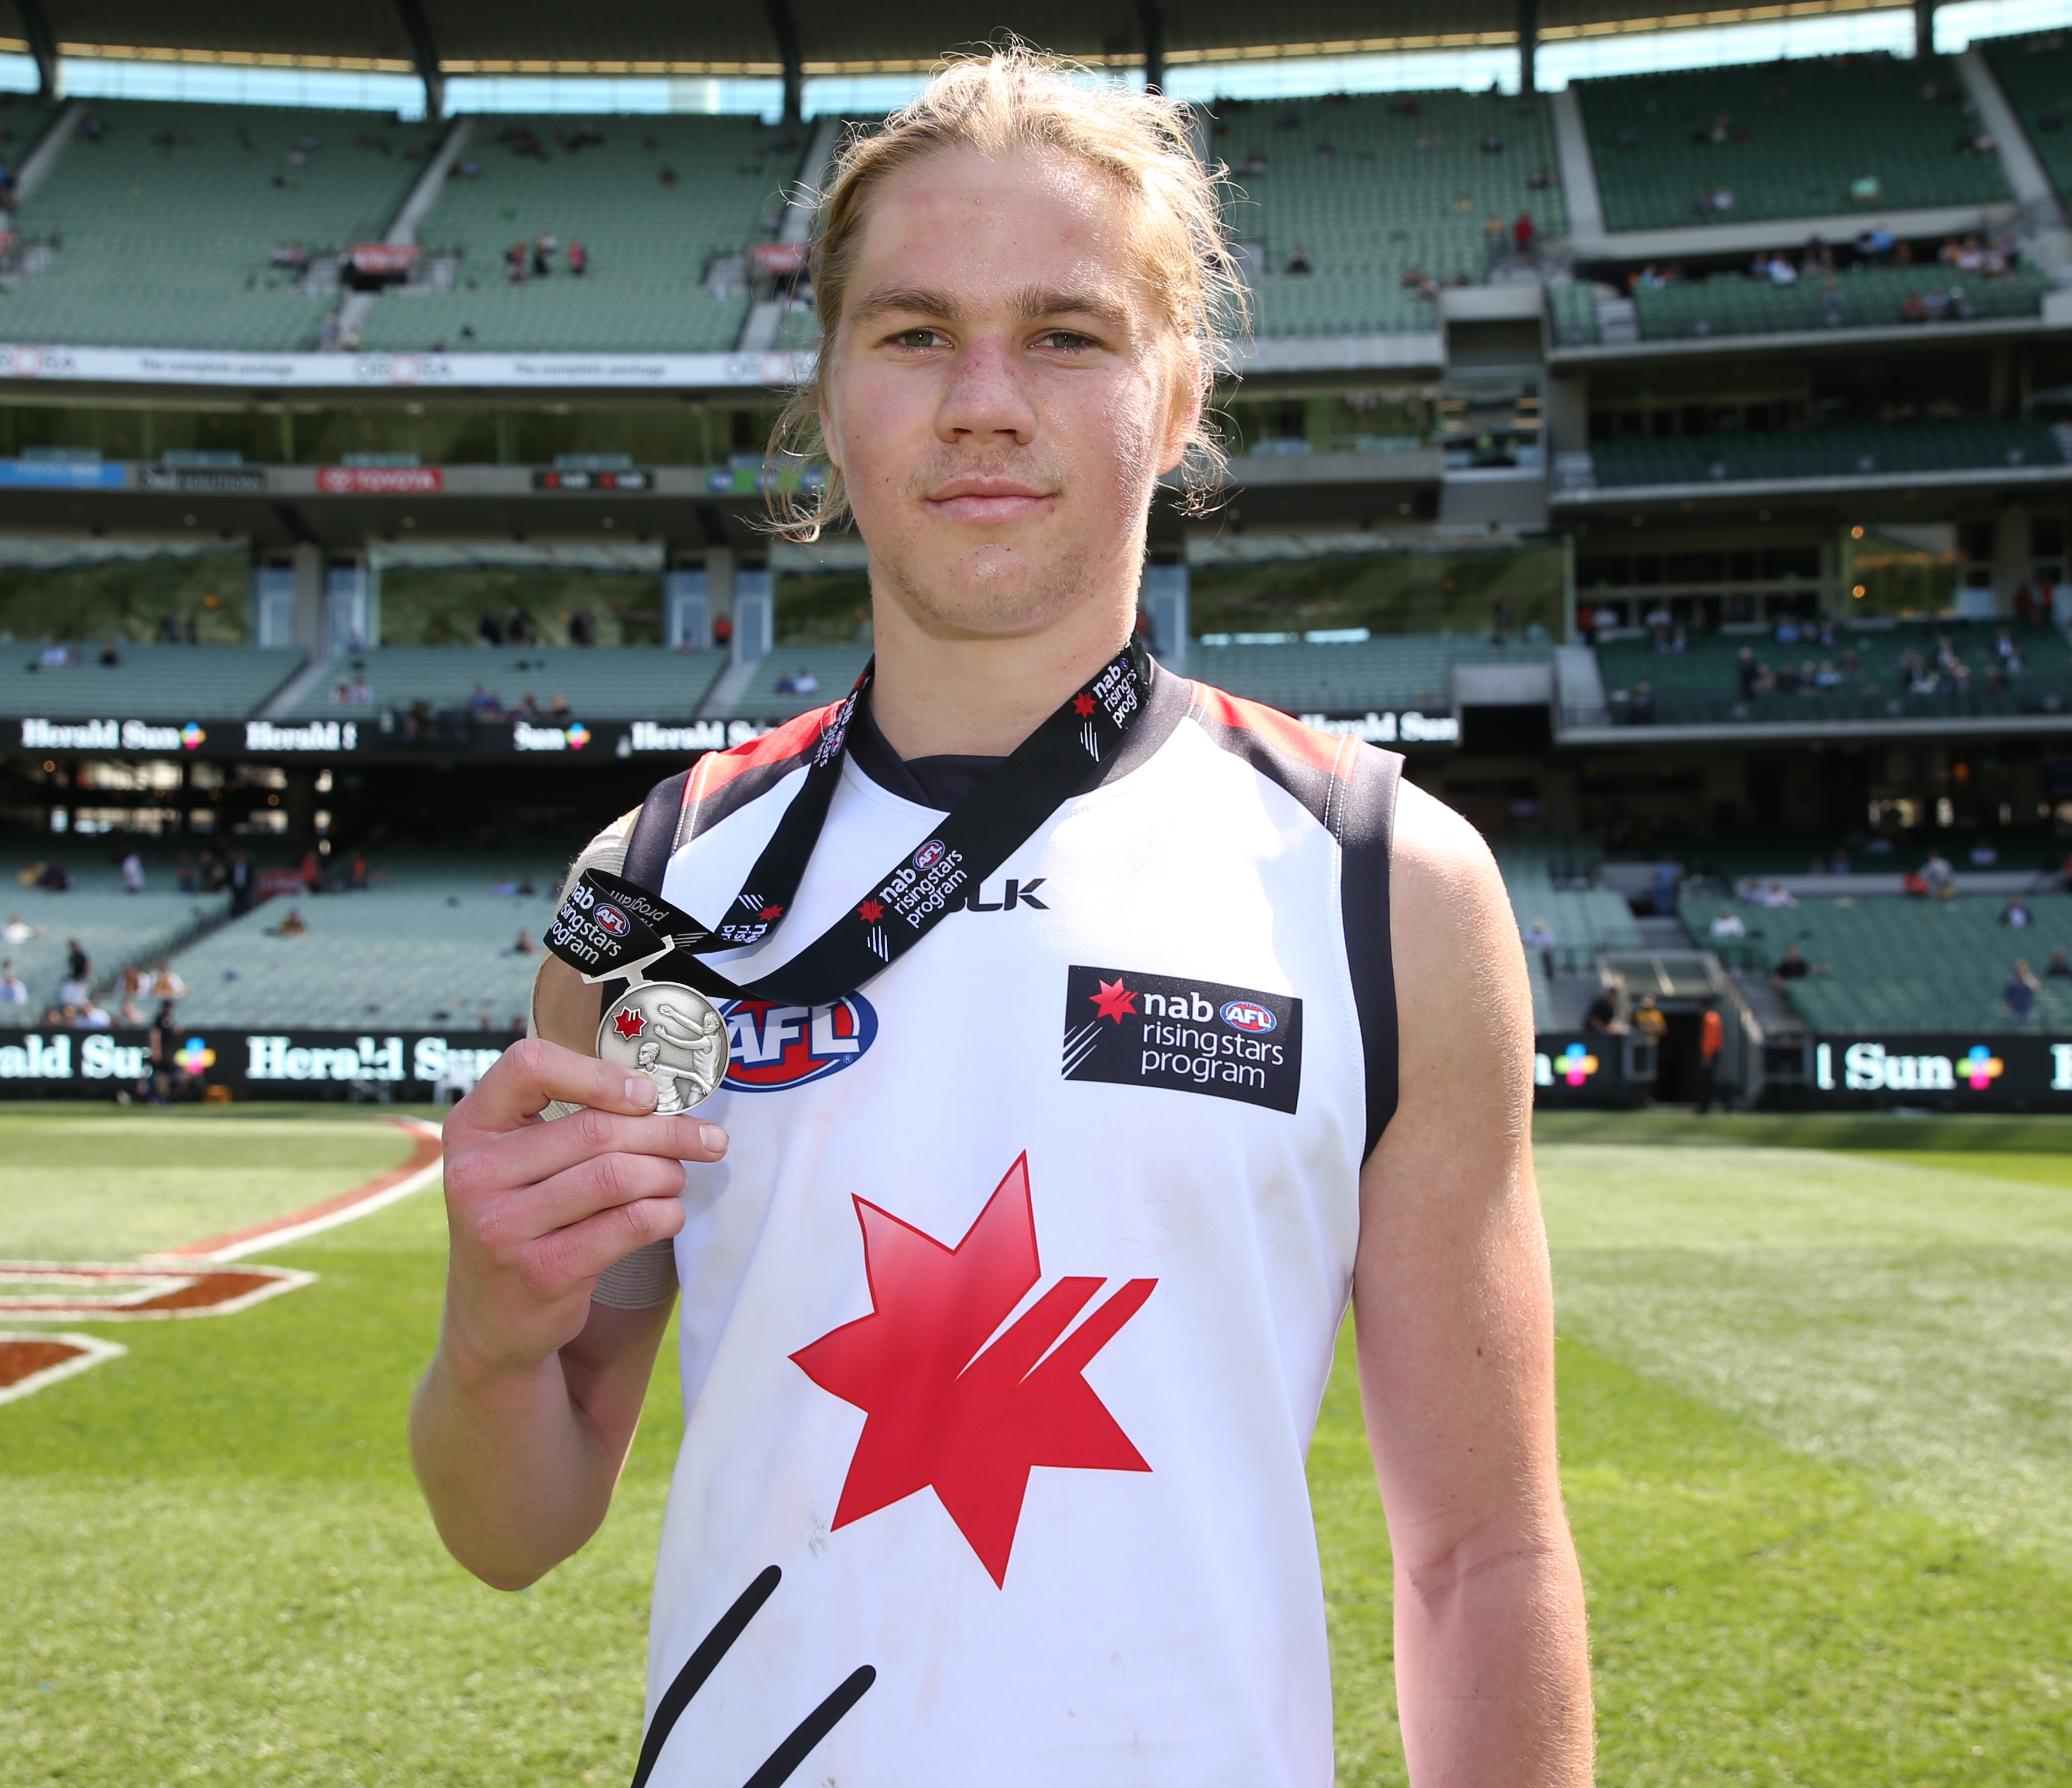 Harrison Himmelberg poses with his medal for best afield. (Photo by Adam Trafford/AFL Media)